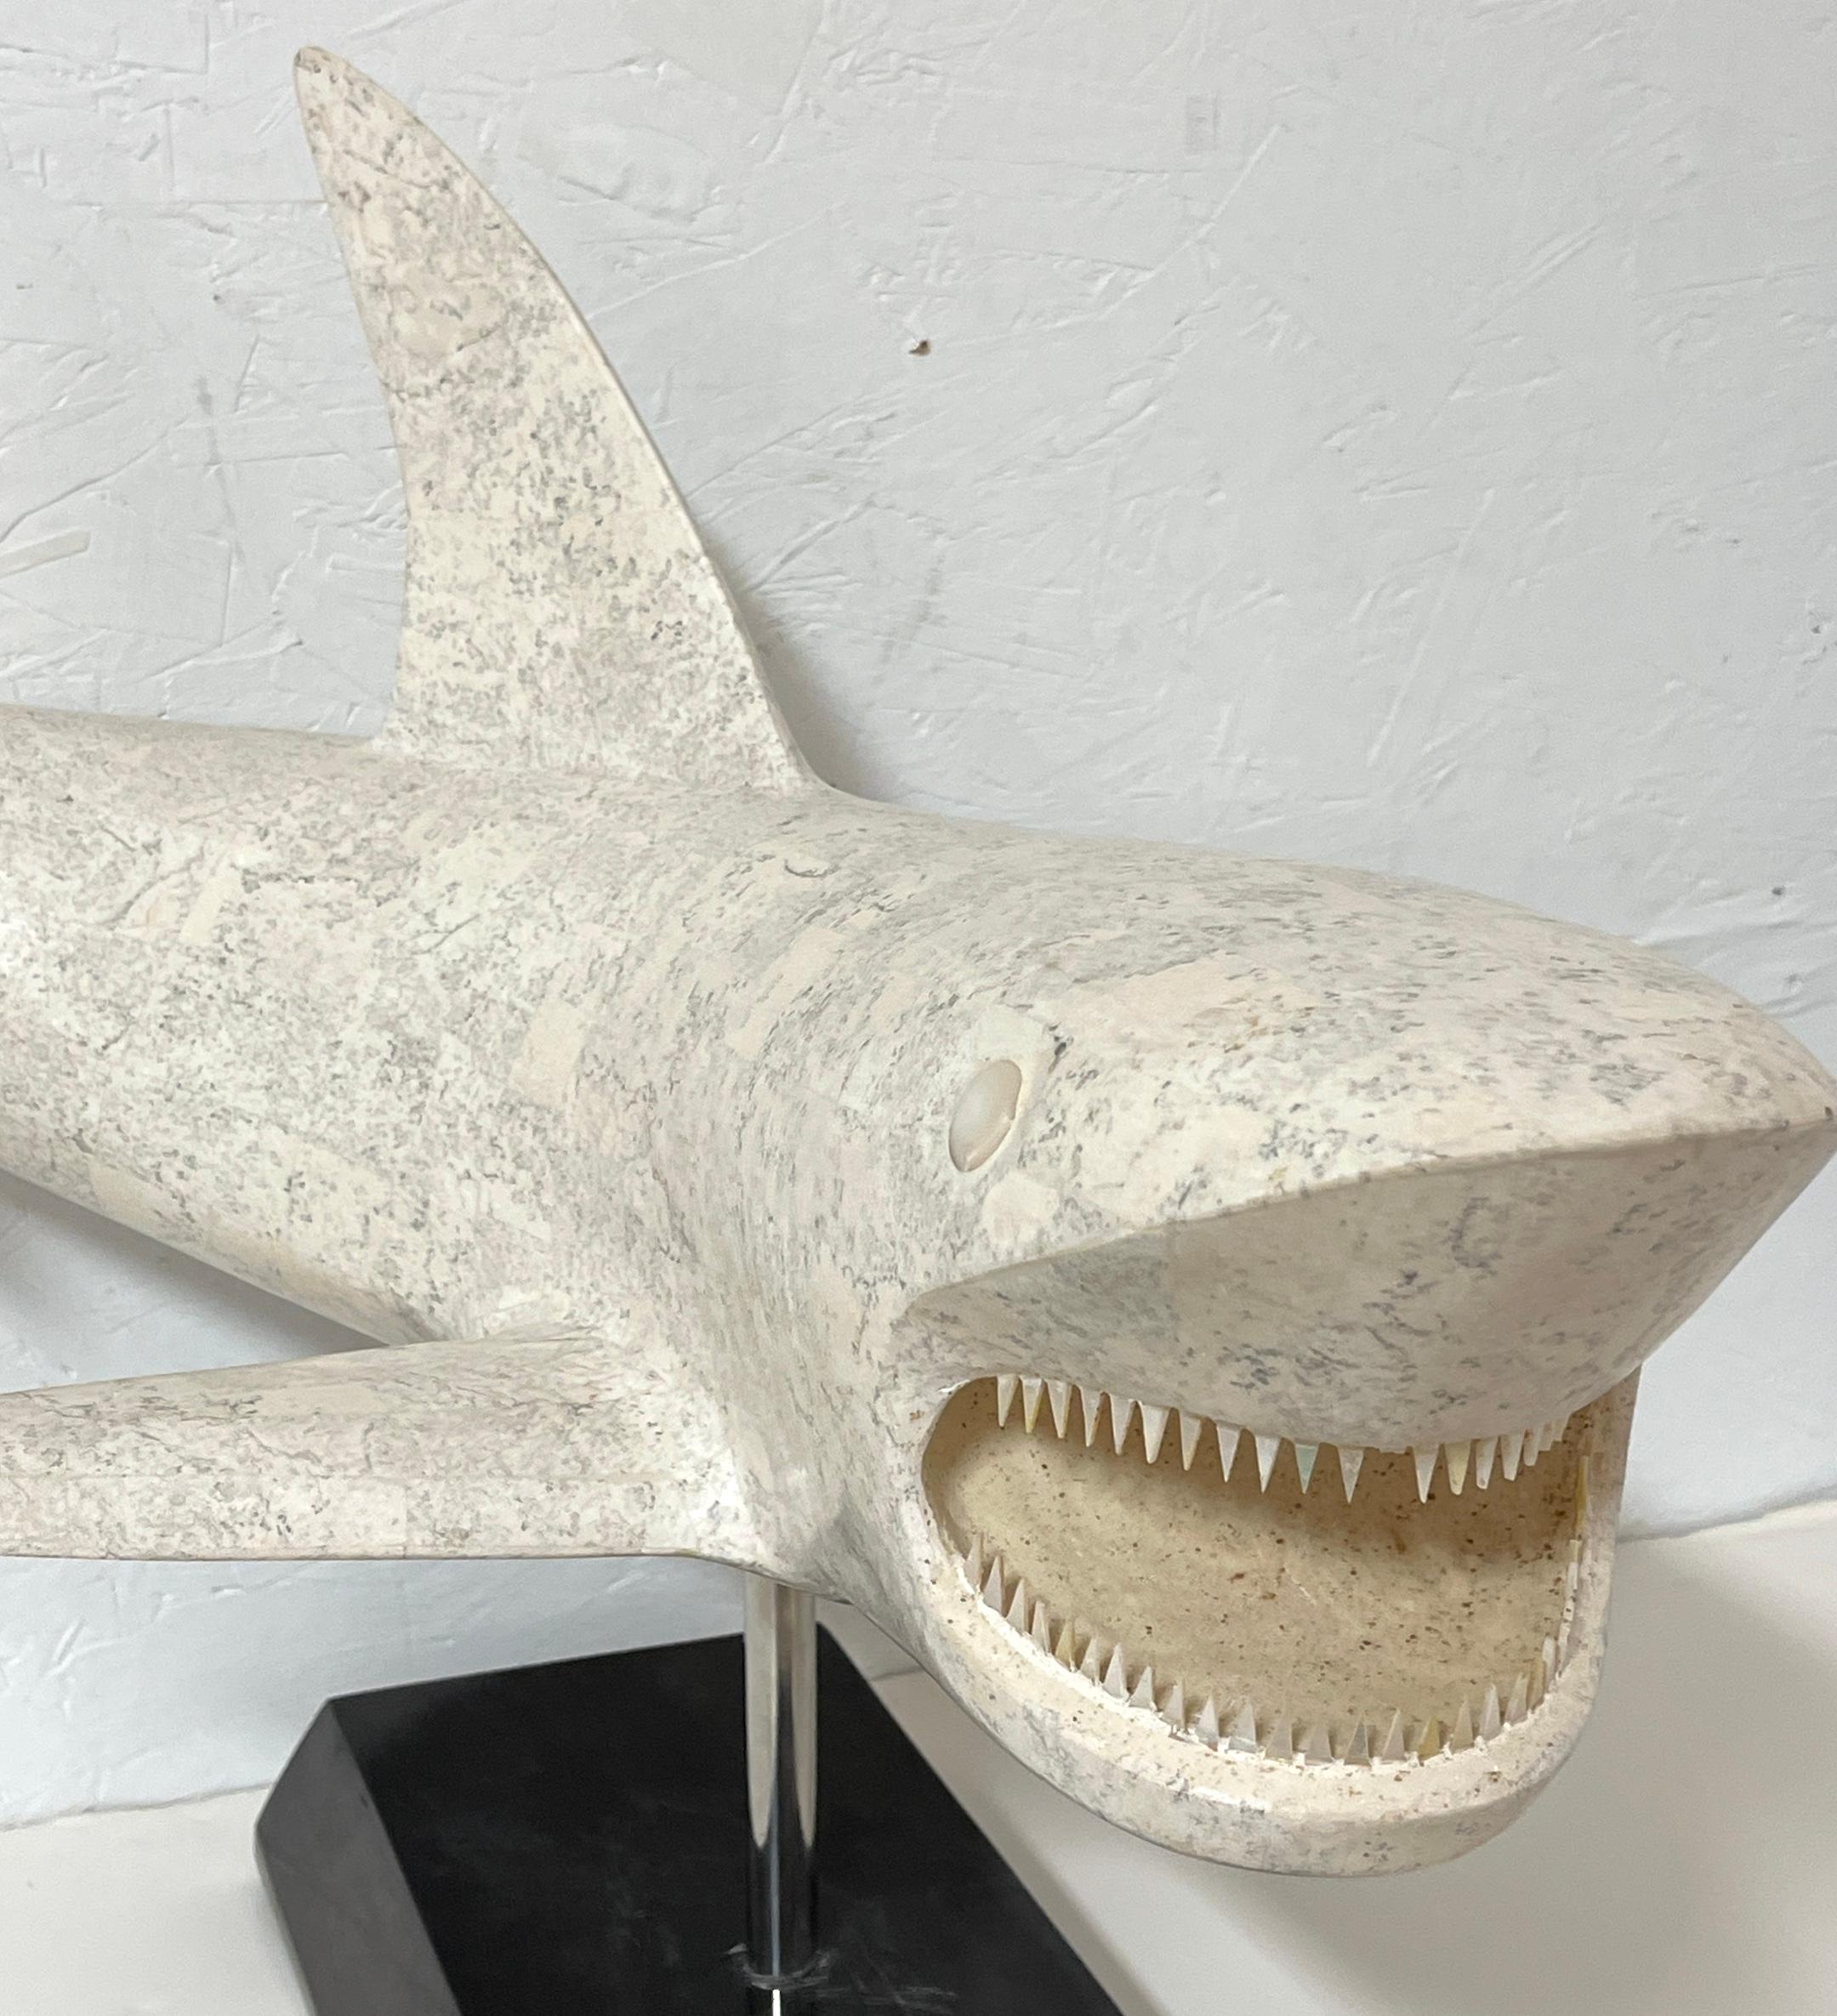 Inlay Large Modern Inlaid Tessellated Stone Sculpture of a Great White Shark   For Sale